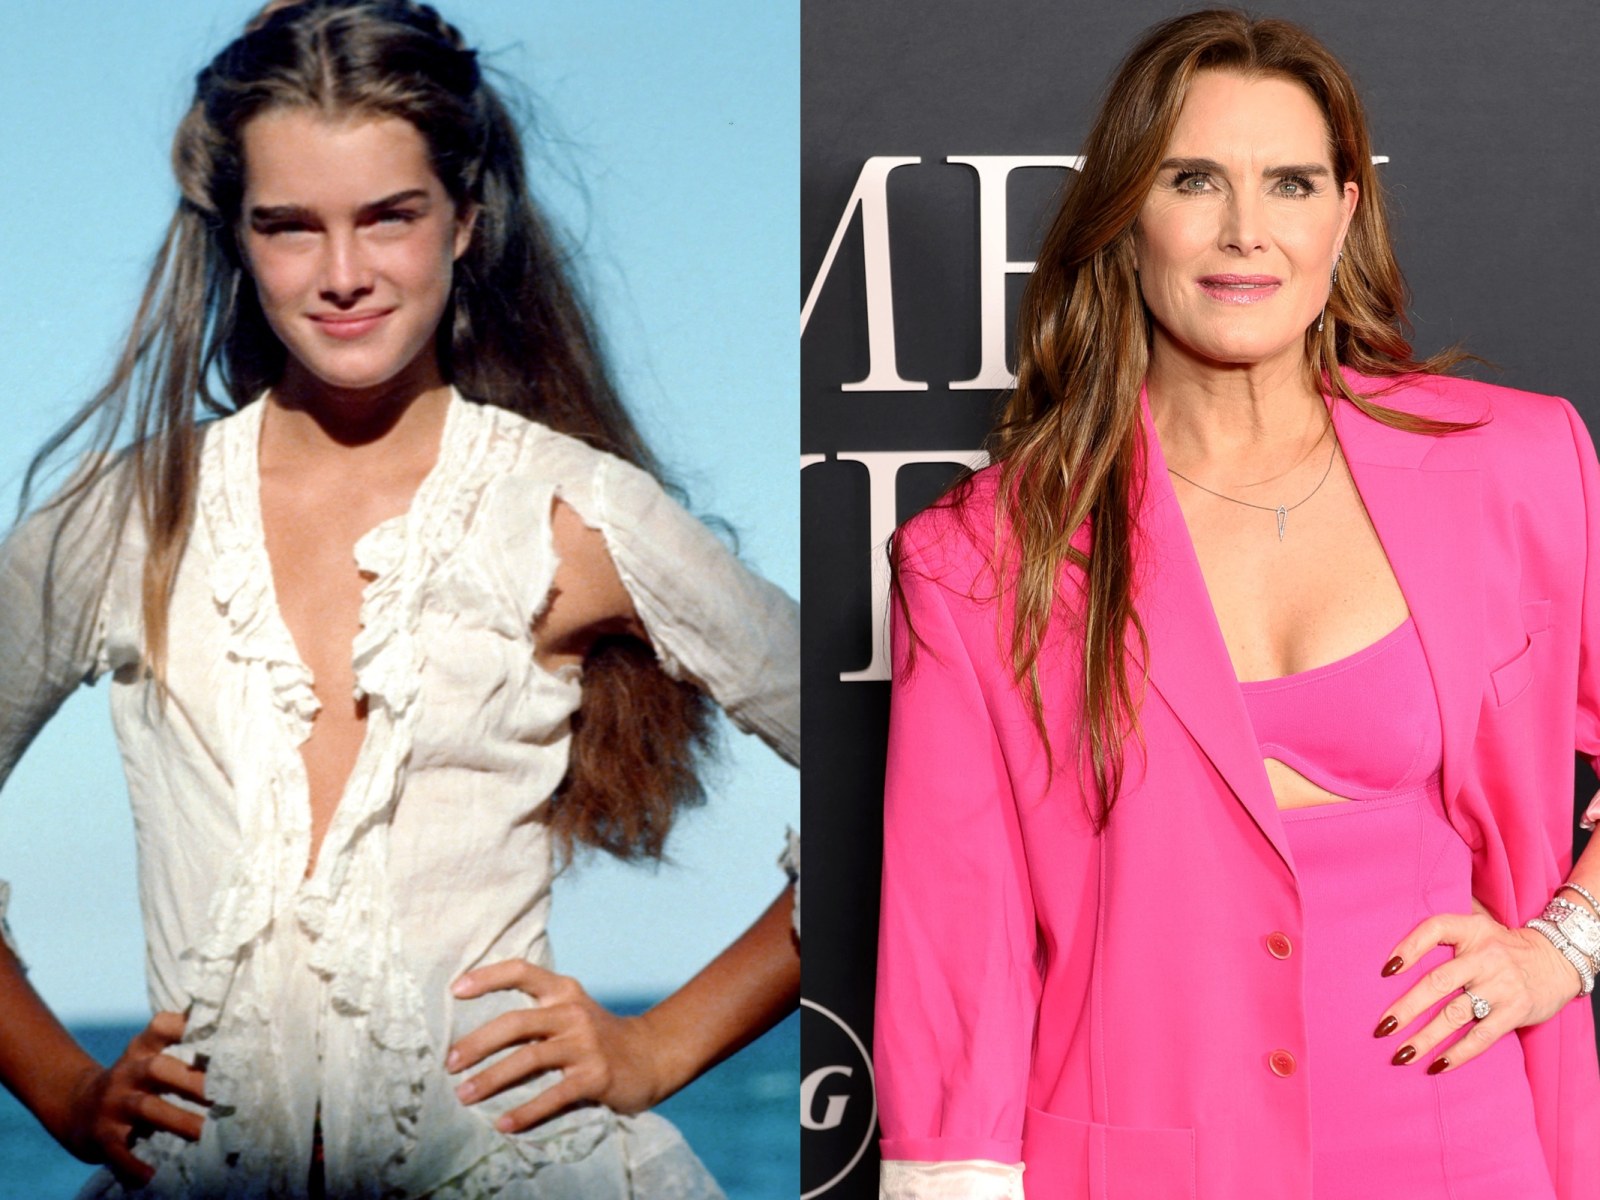 1970s Sex Symbols - Brooke Shields' Sexualization as a Child Was Staggering